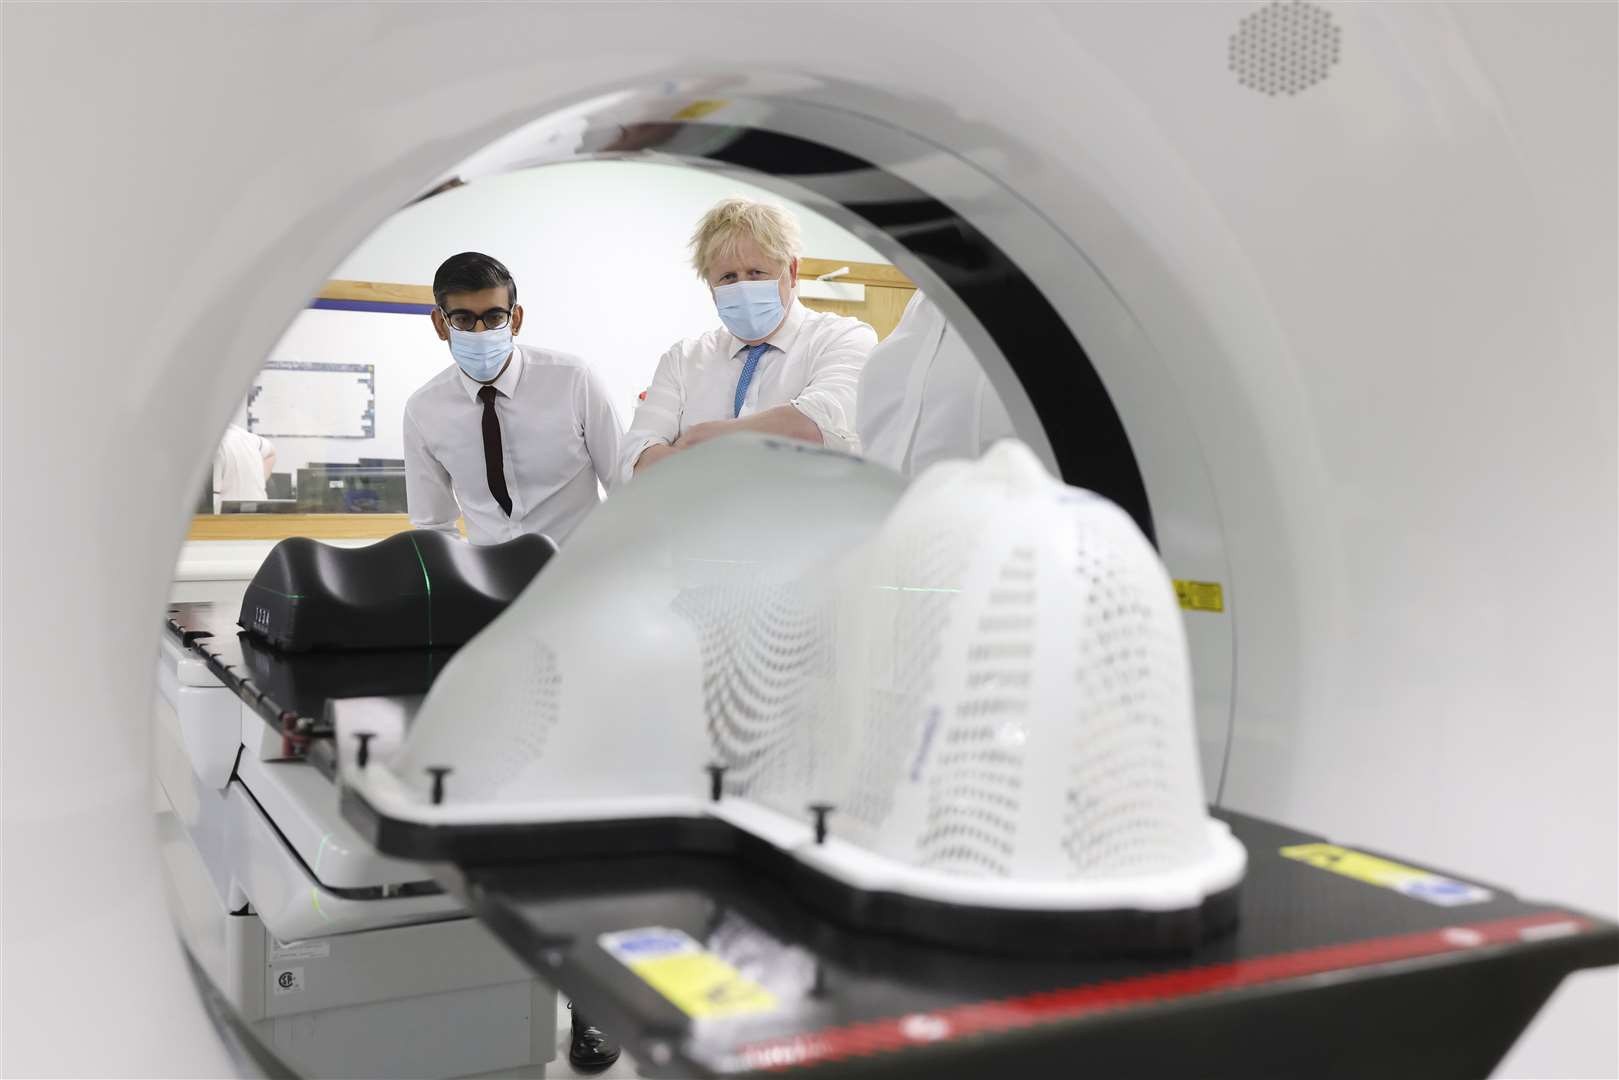 Boris Johnson and Rishi Sunak take a look at a CT Scanner. Picture: Andrew Parsons / No 10 Downing Street